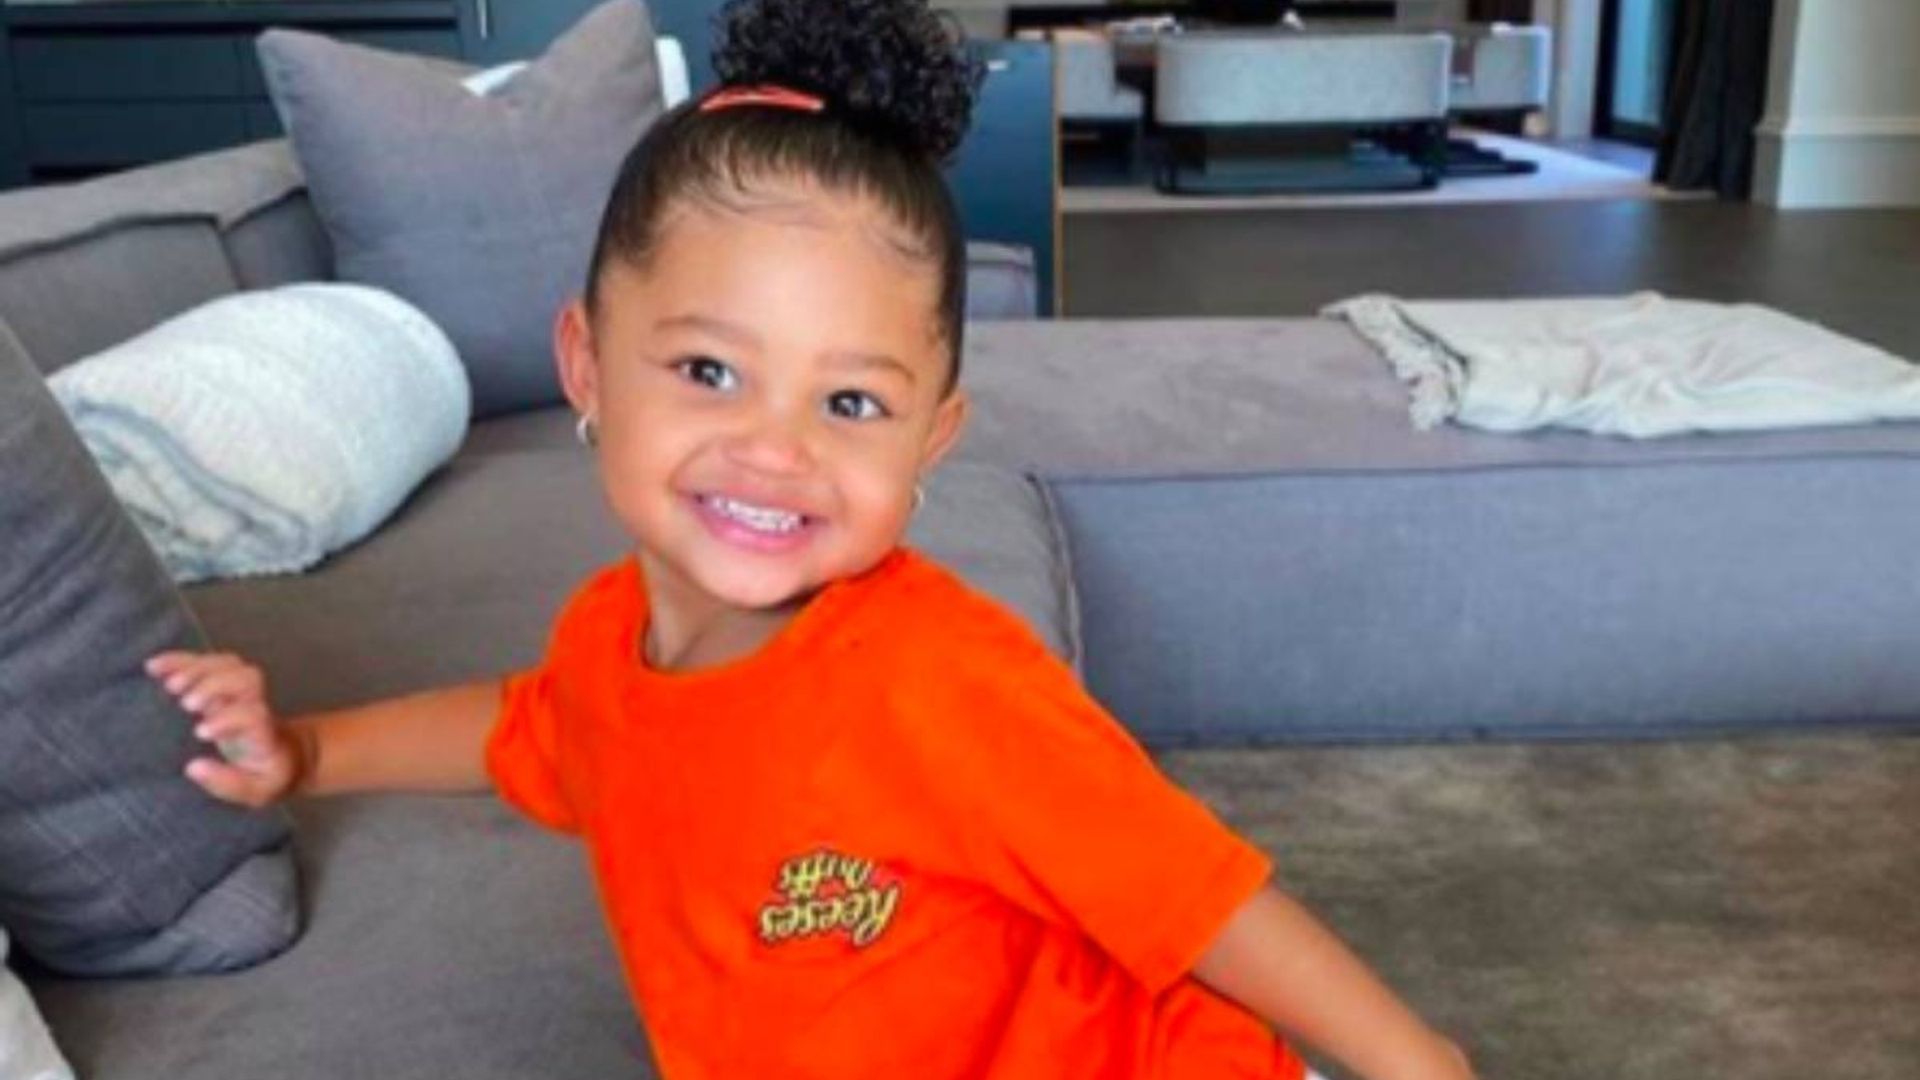 Kylie Jenner shares glimpse inside daughter Stormi's quirky bedroom – with artwork and family photos